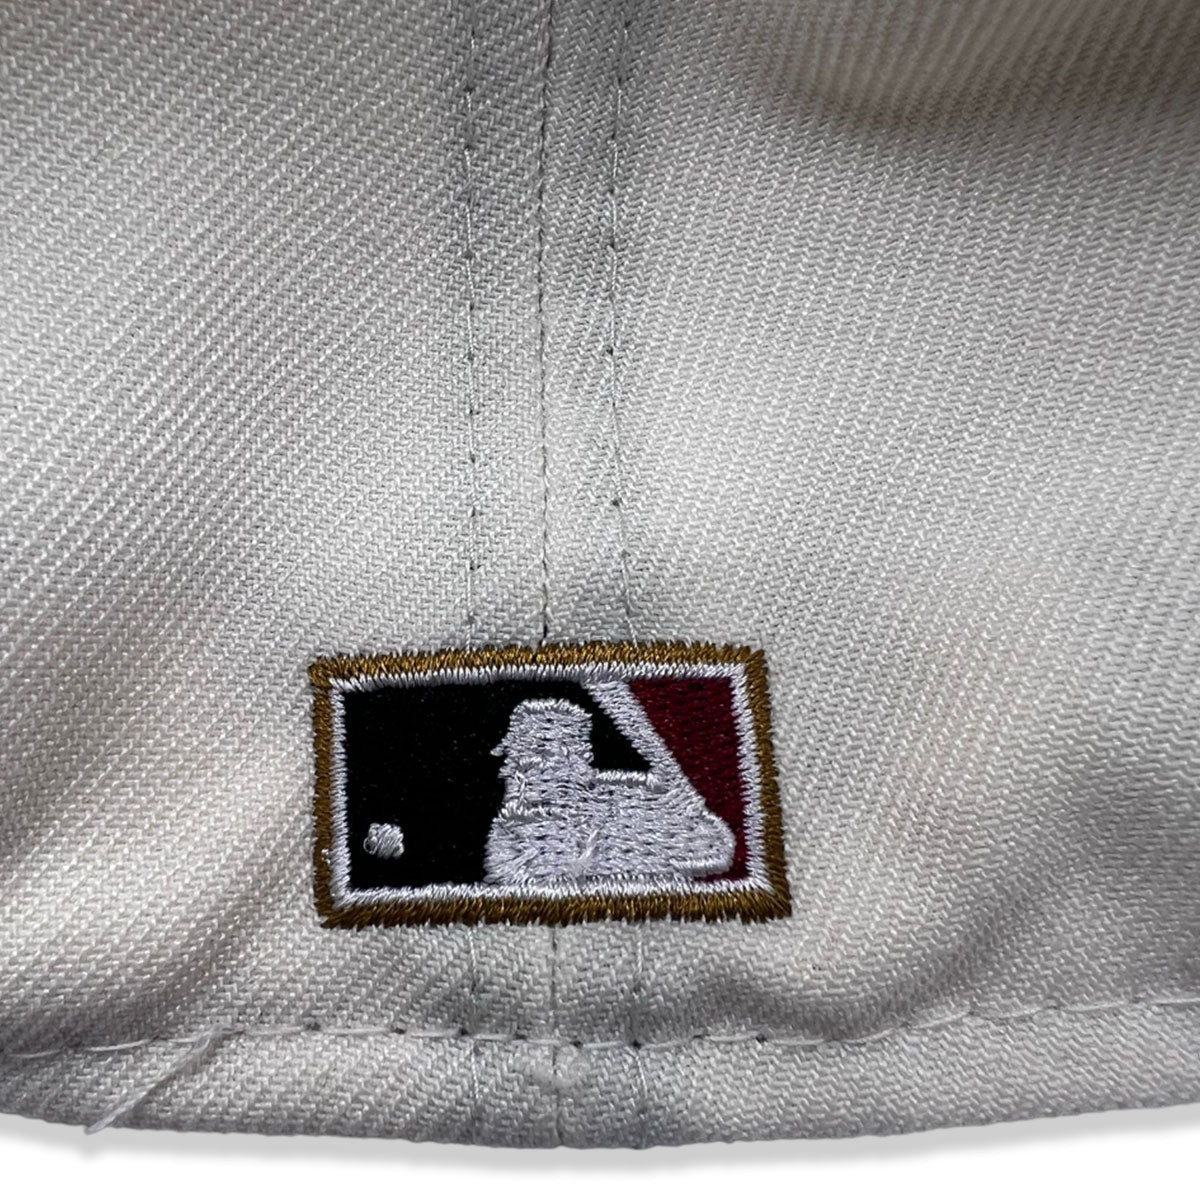 New Era Philedelphia Phillies All Star Game 1996 Patch 59Fifty Fitted